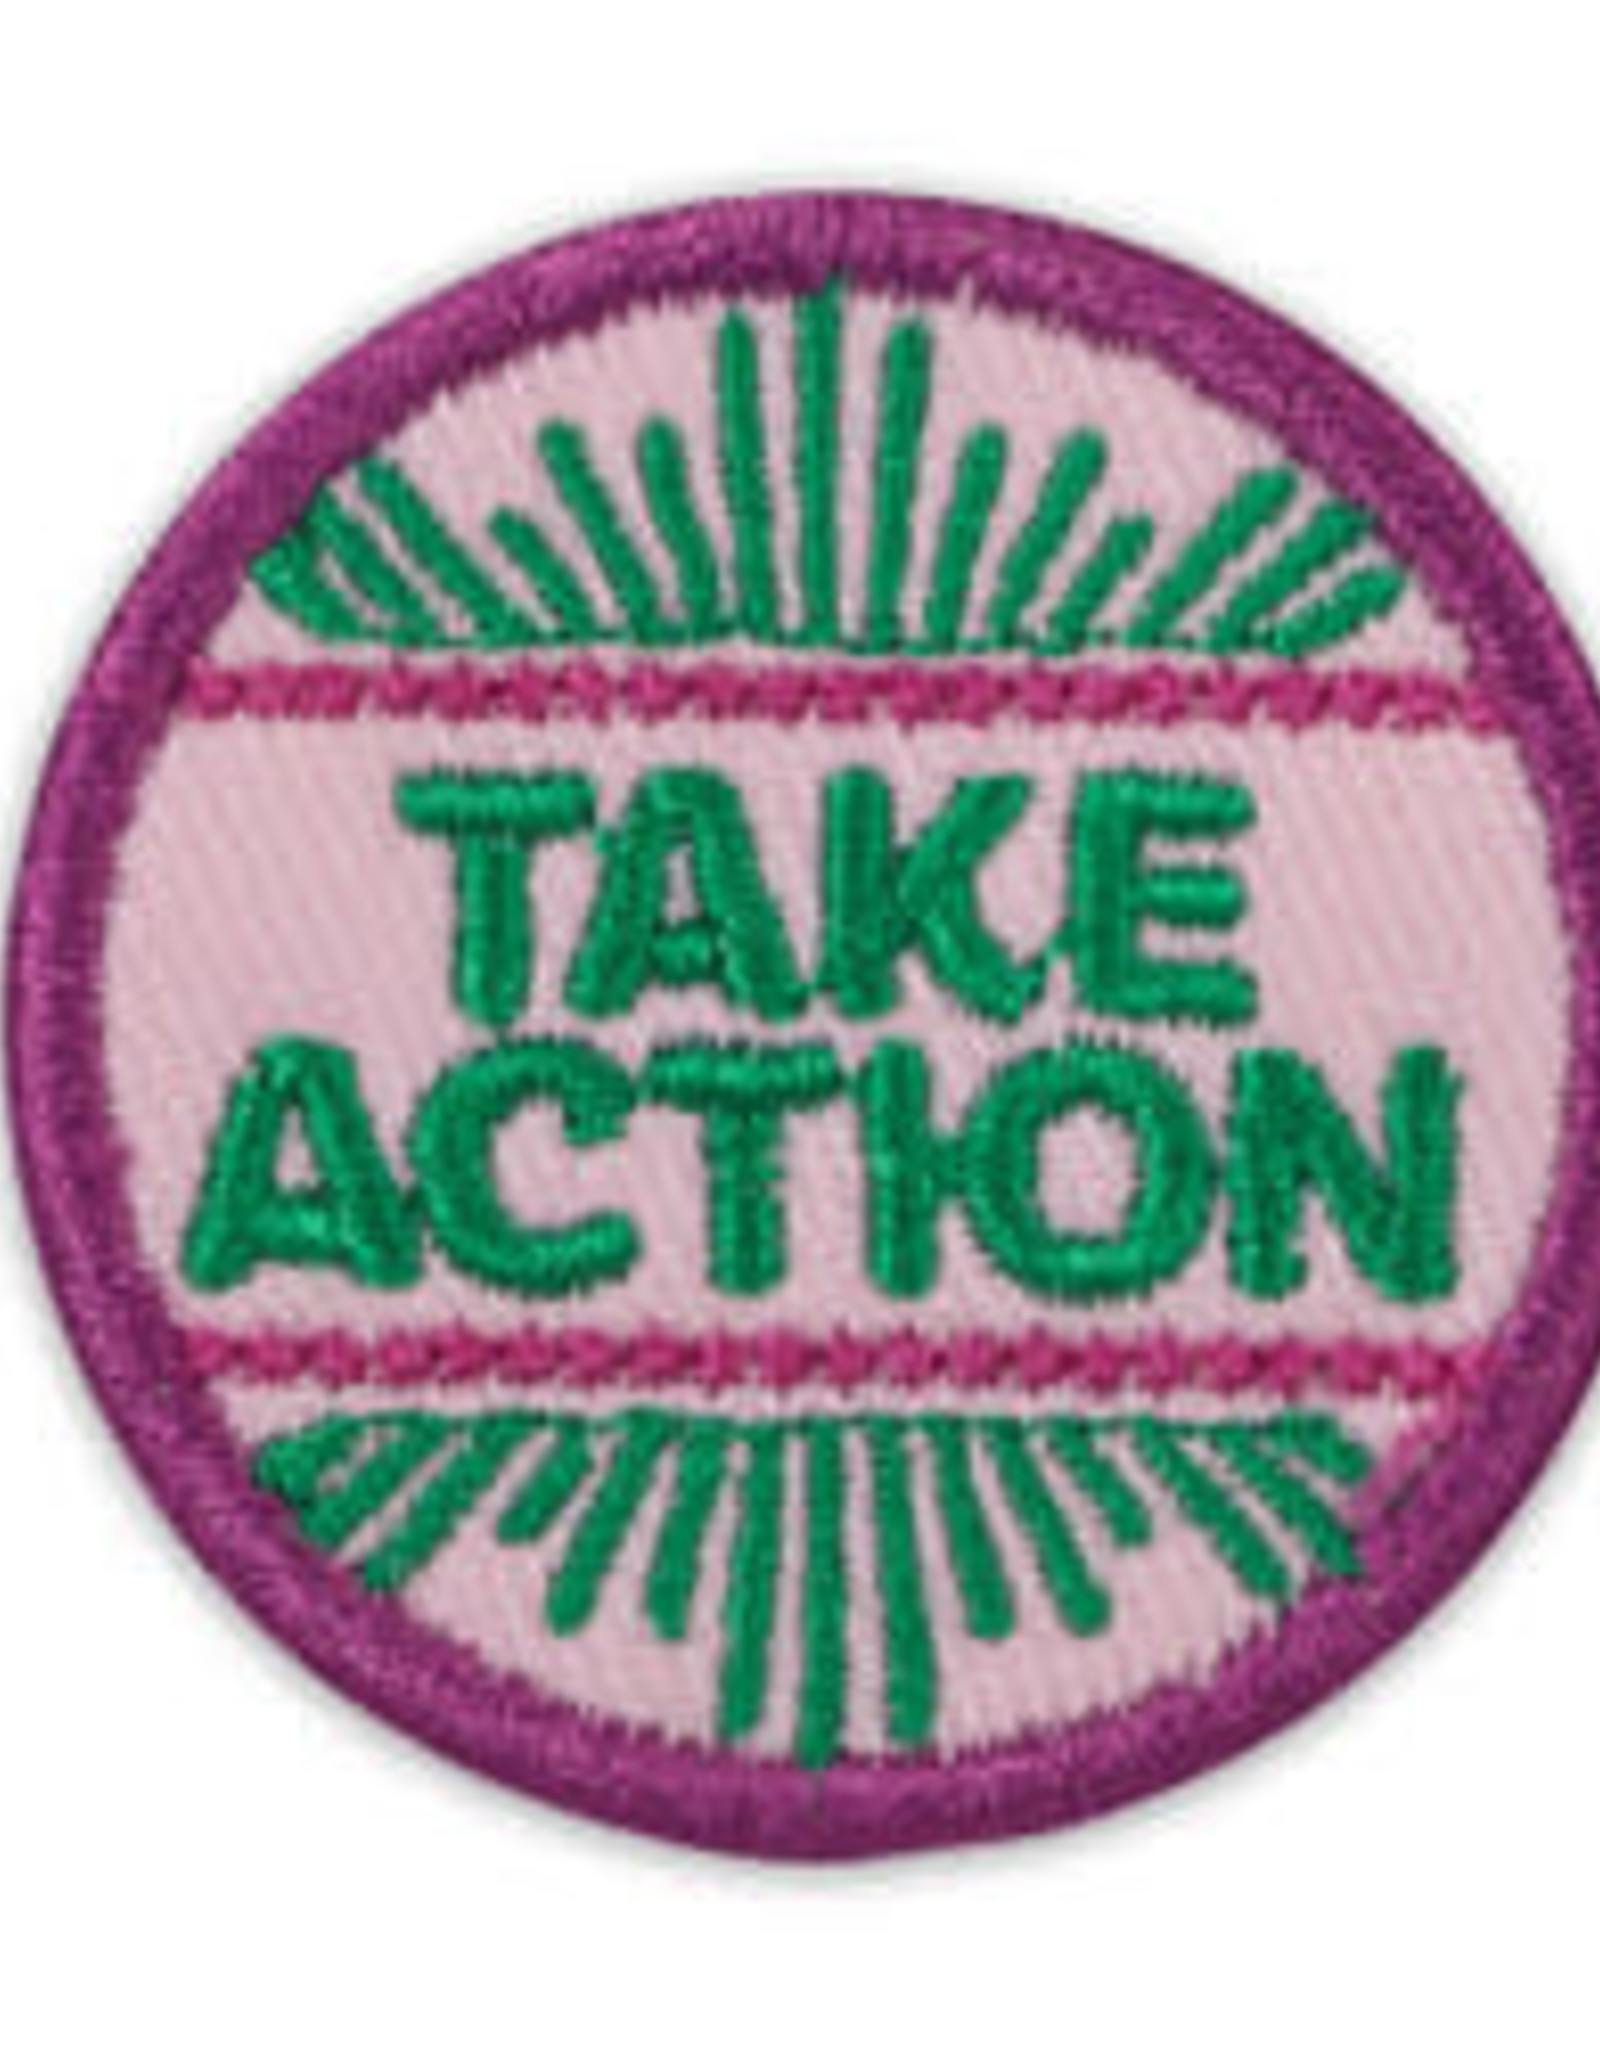 GIRL SCOUTS OF THE USA Junior Take Action Award Badge